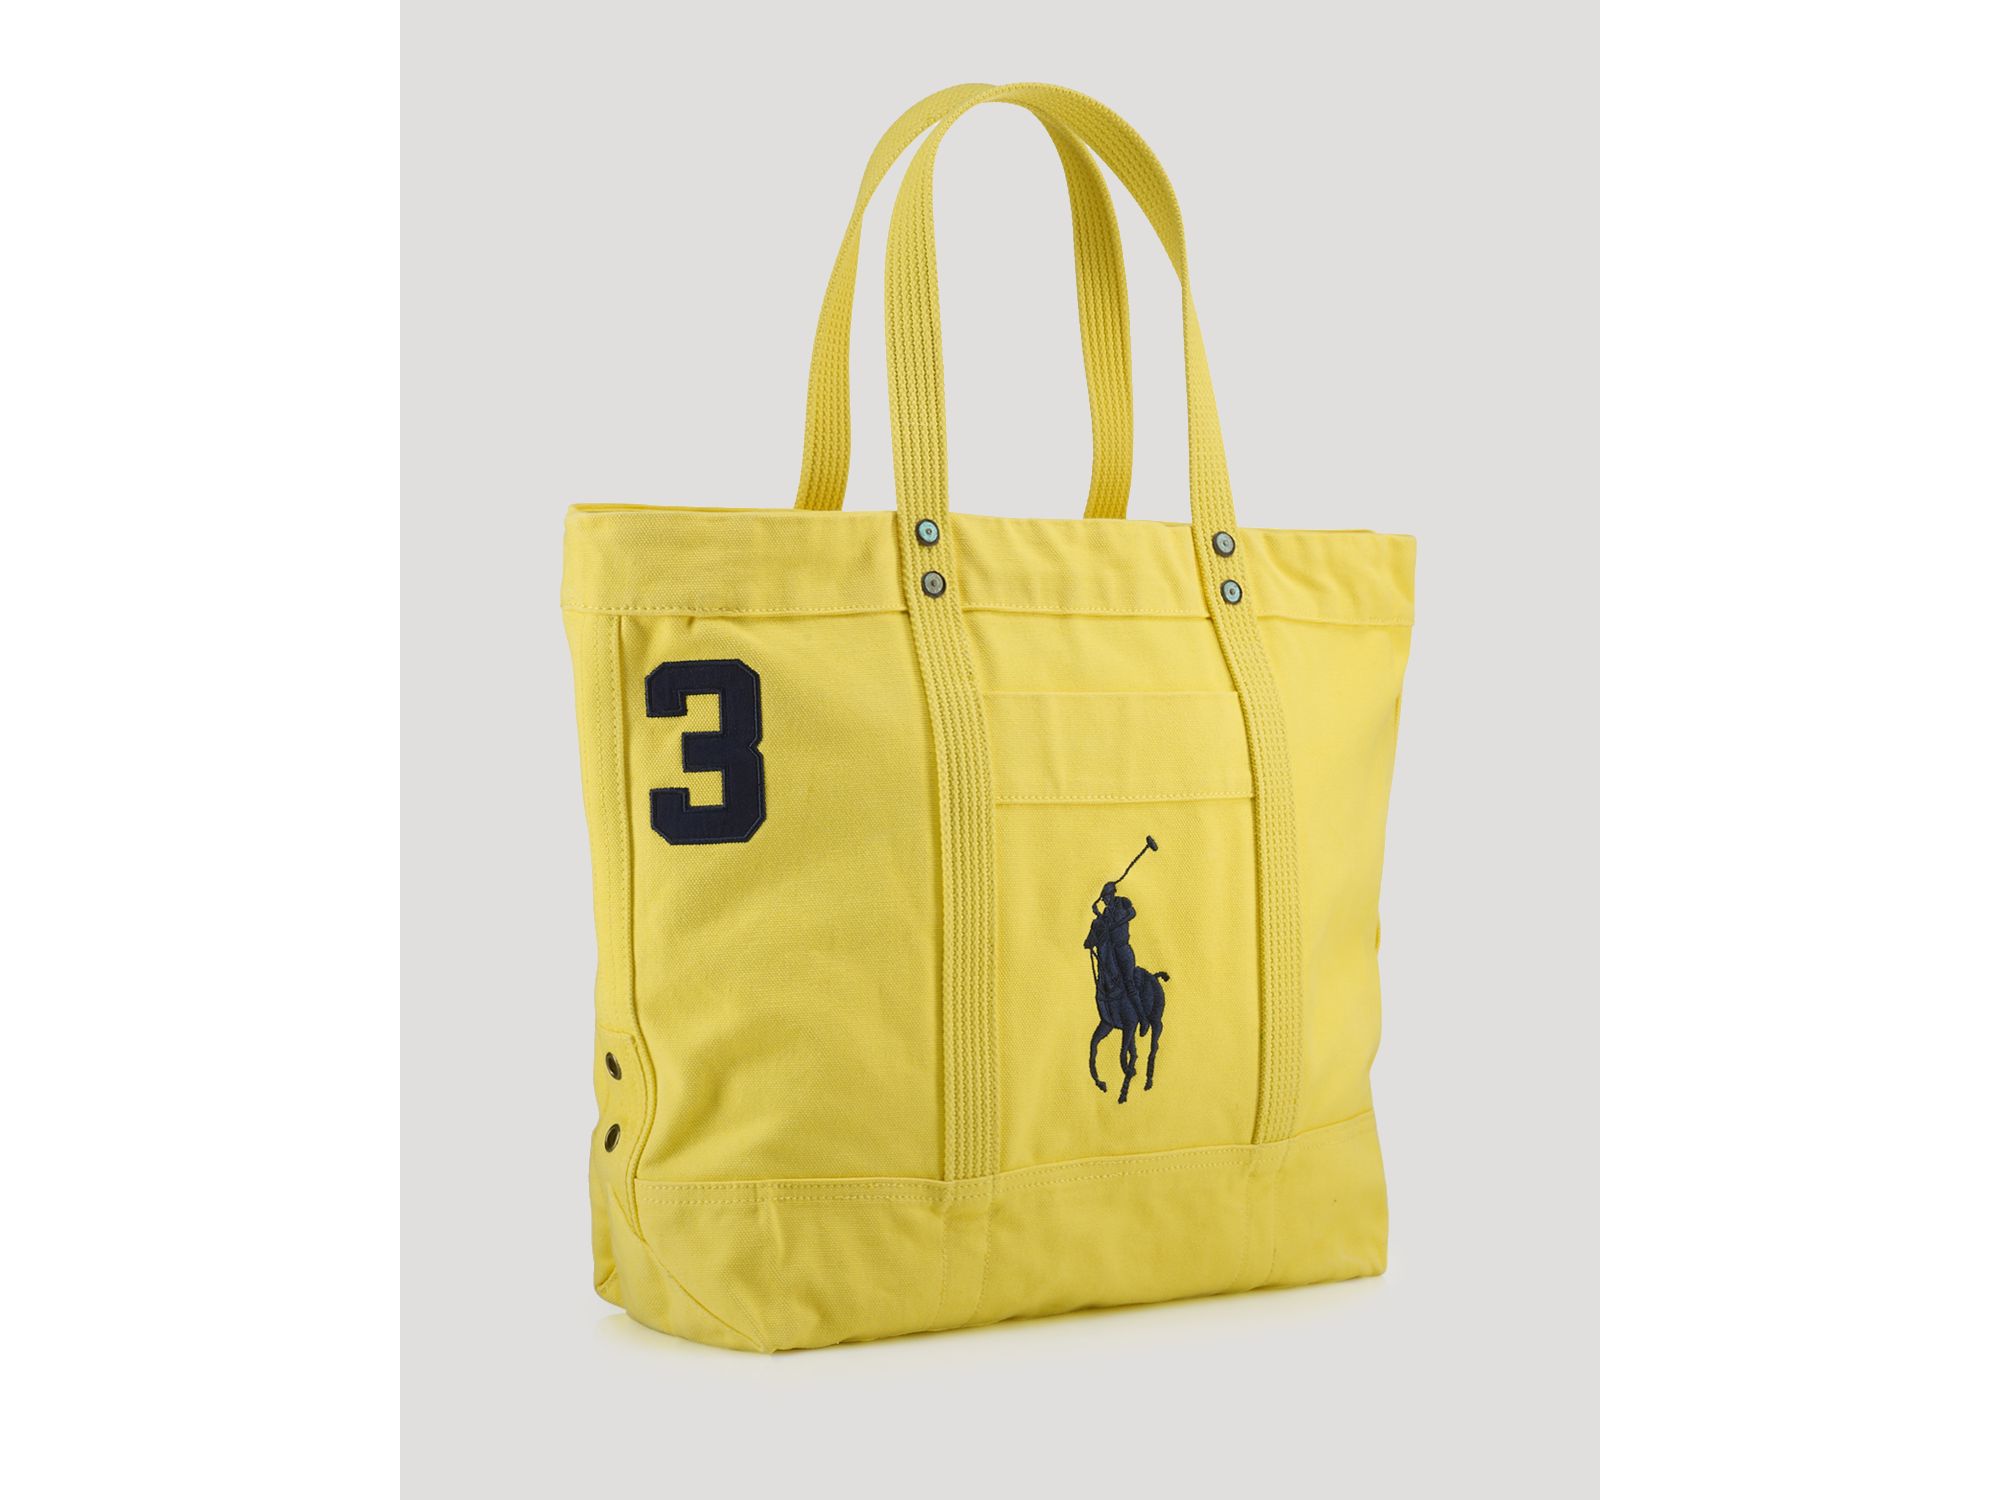 Lyst - Ralph lauren Collection Accessories Big Pony Tote in Yellow for Men